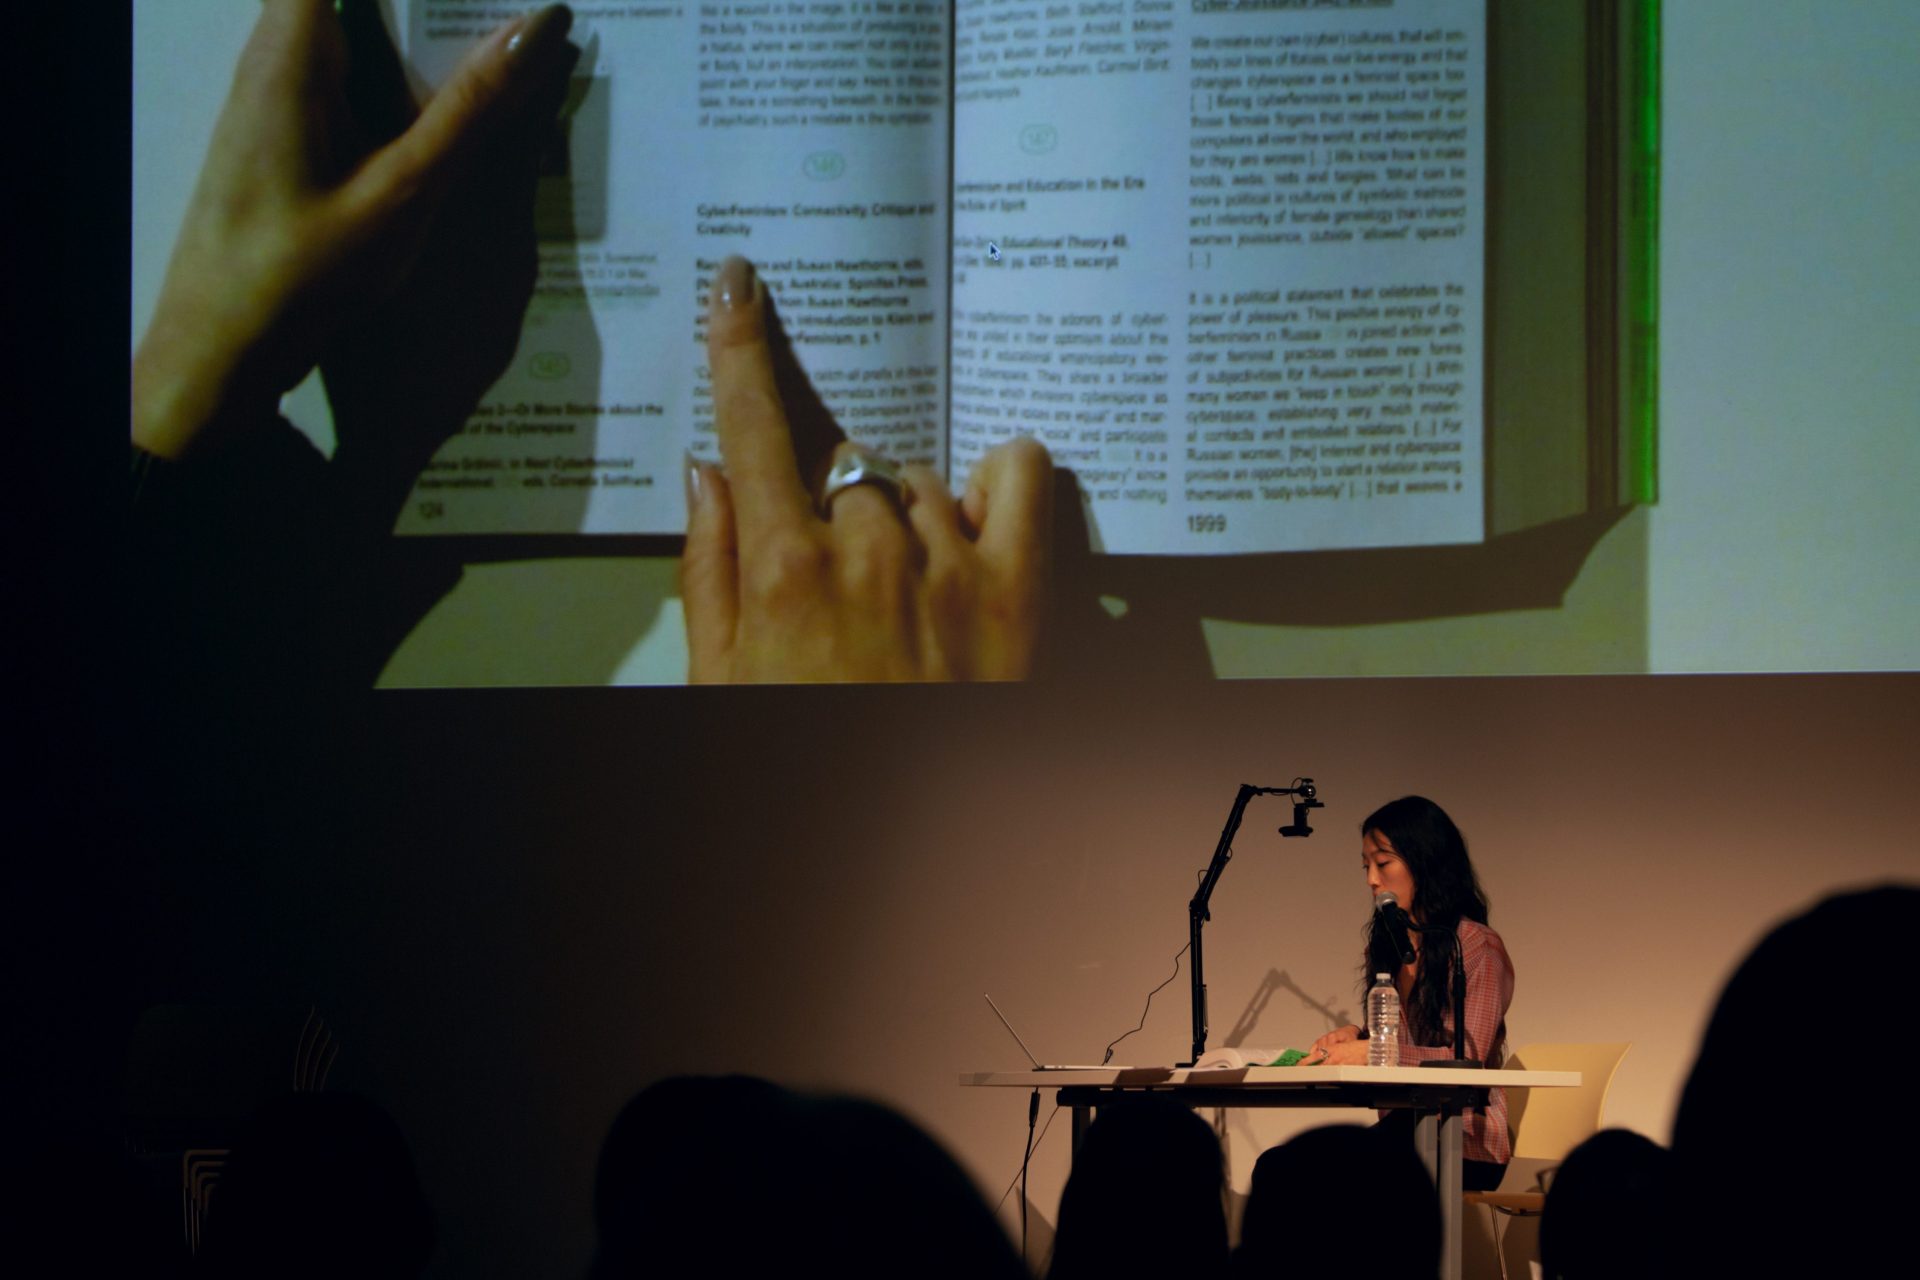 Mindy reading from a book that is being projected on a big screen